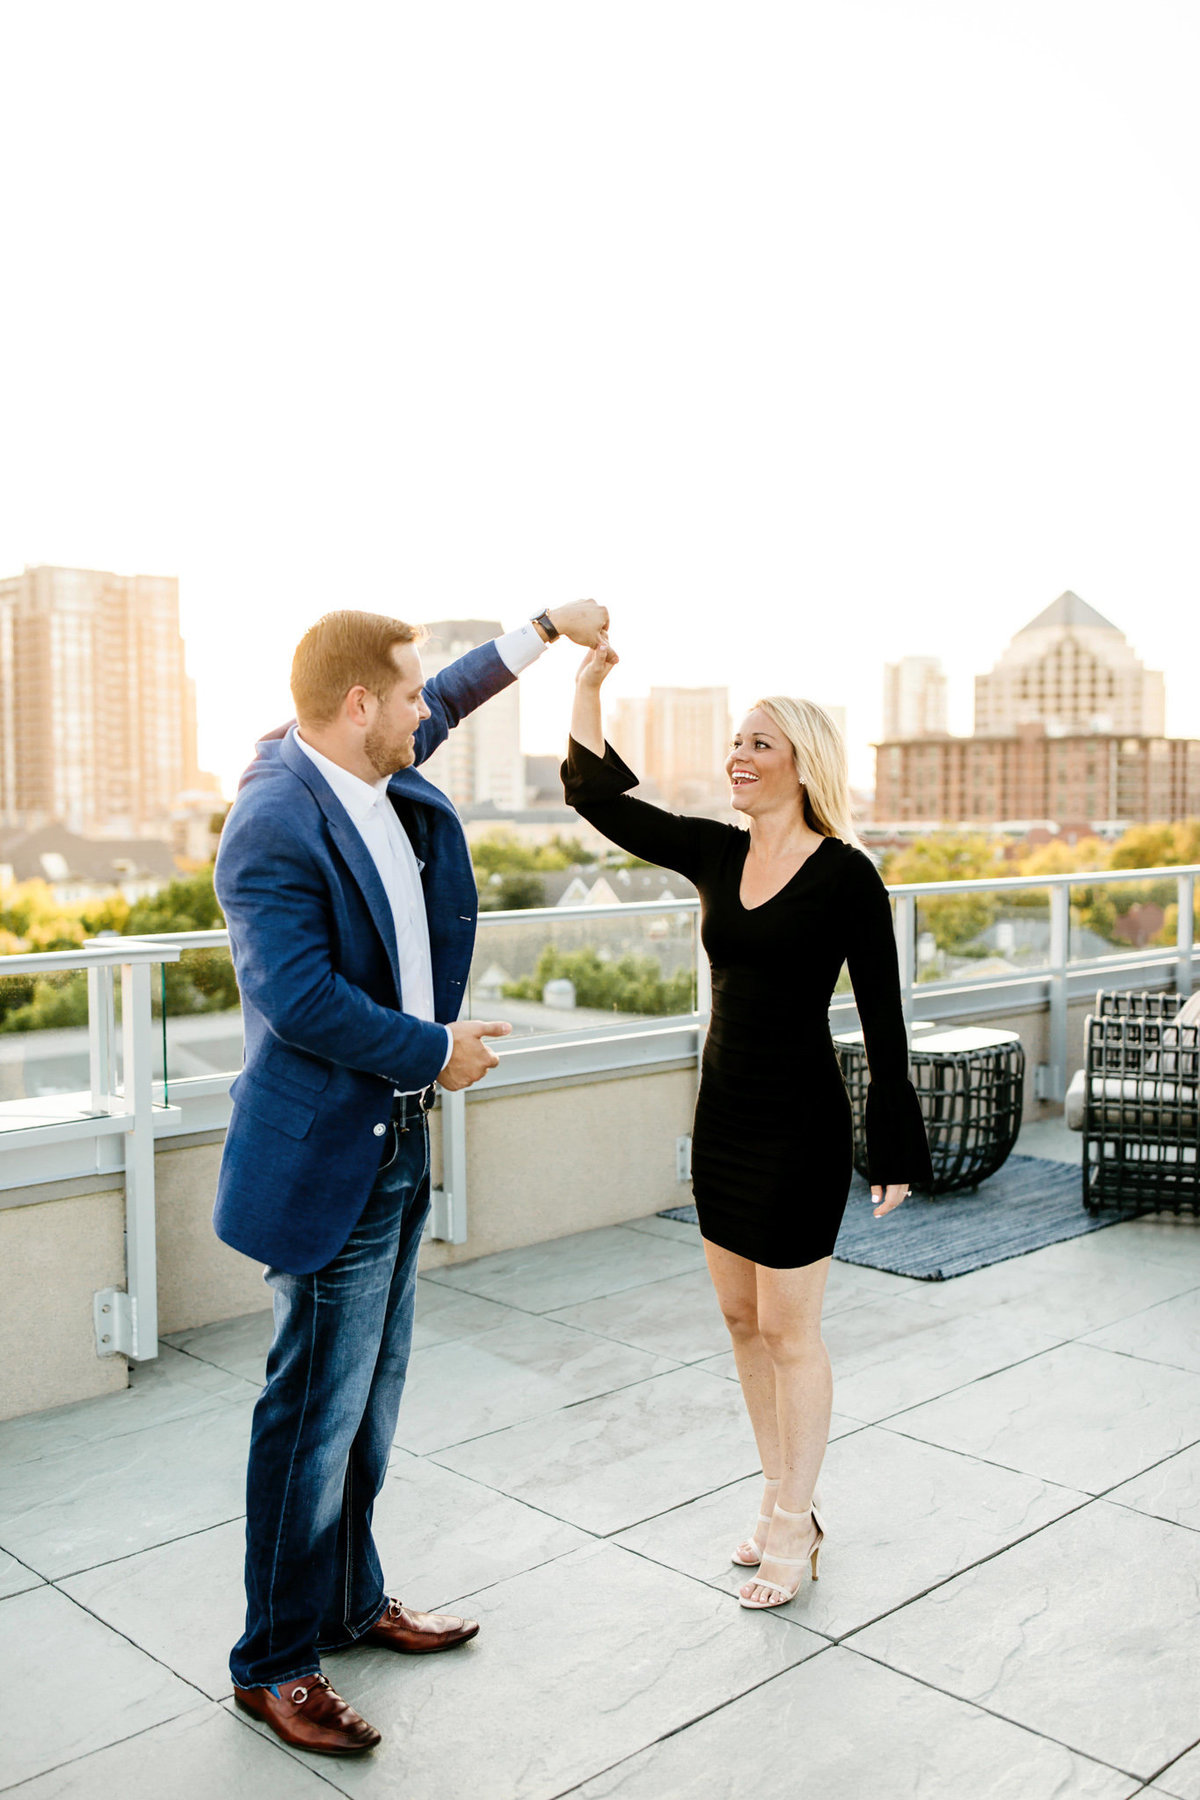 Eric & Megan - Downtown Dallas Rooftop Proposal & Engagement Session-92